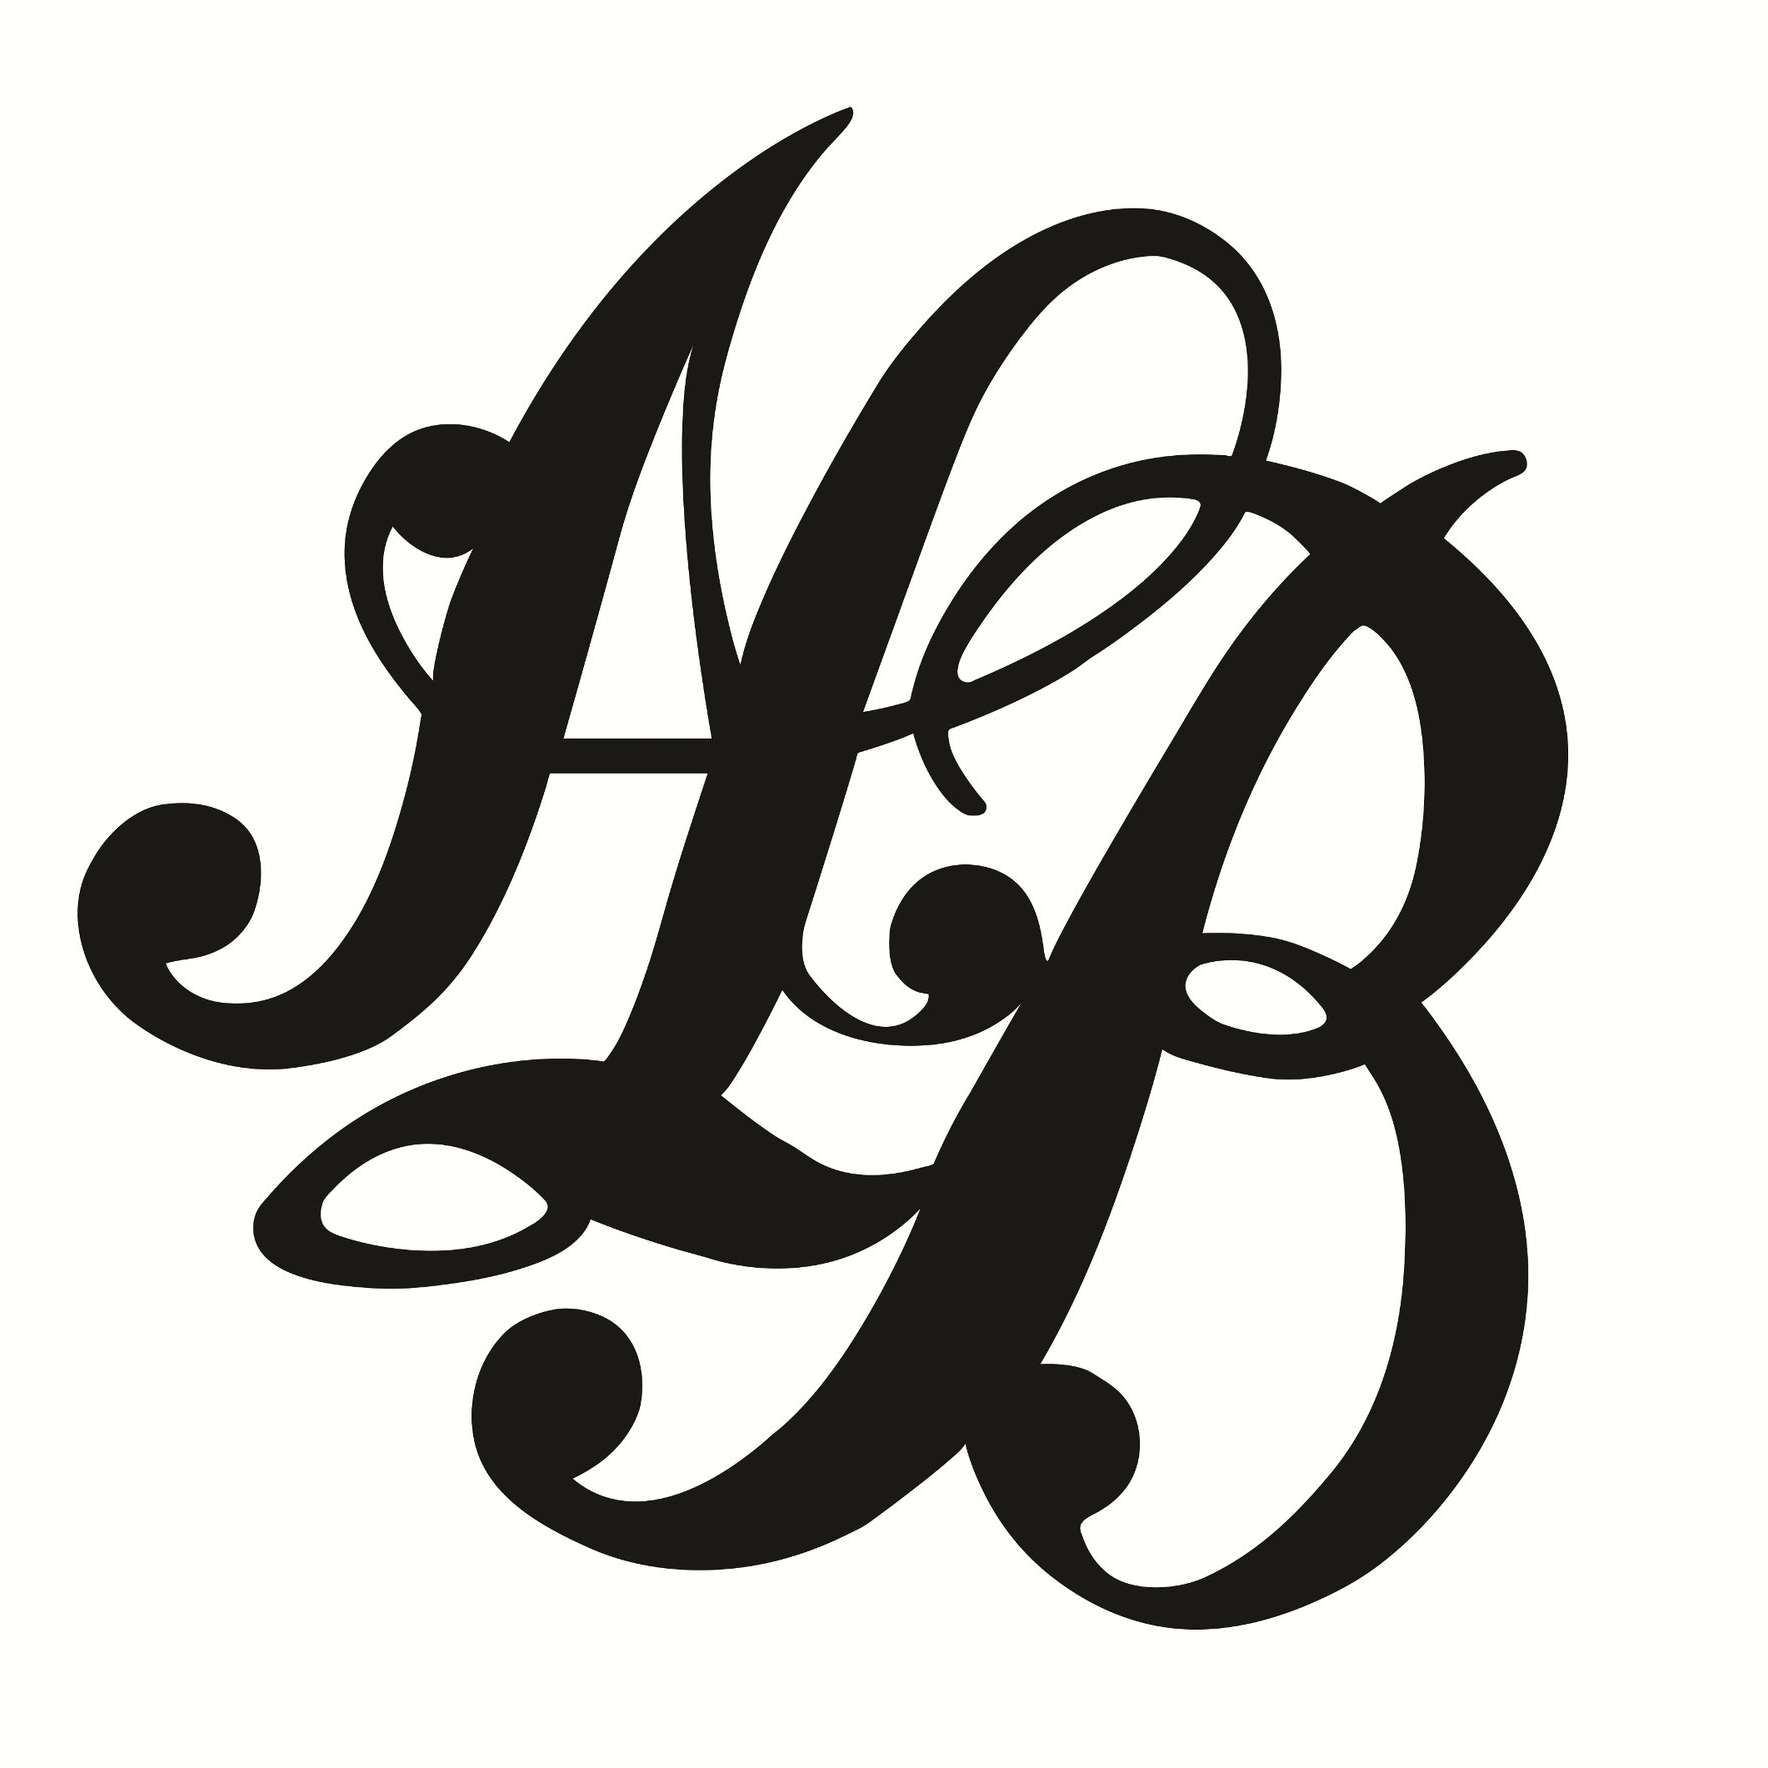 Amy's logo, inspired by the Victorian mourning pendant